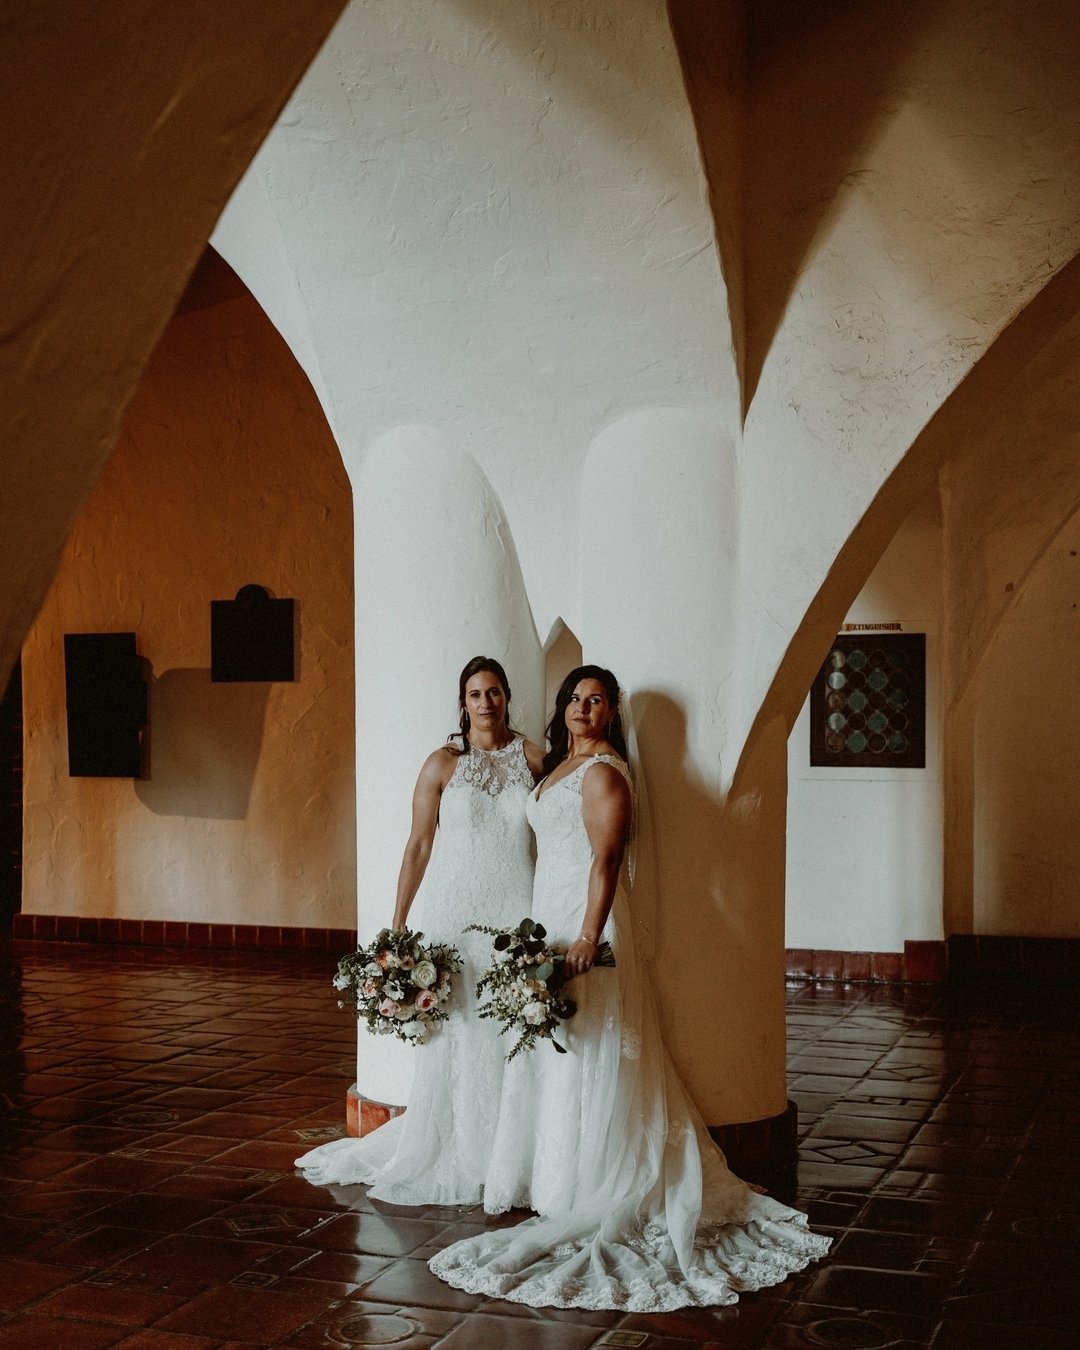 Amy and Kim's Santa Barbara wedding was so sweet and heart felt the day was completely perfect. 
&bull;⁠ The Creative Team &bull;⁠
Beautiful Couple: Amy + Kim
Amy's Attire: @emmaleesbridal
Kim&rsquo;s Attire: @emmaleesbridal
Ceremony Venue: Santa Bar